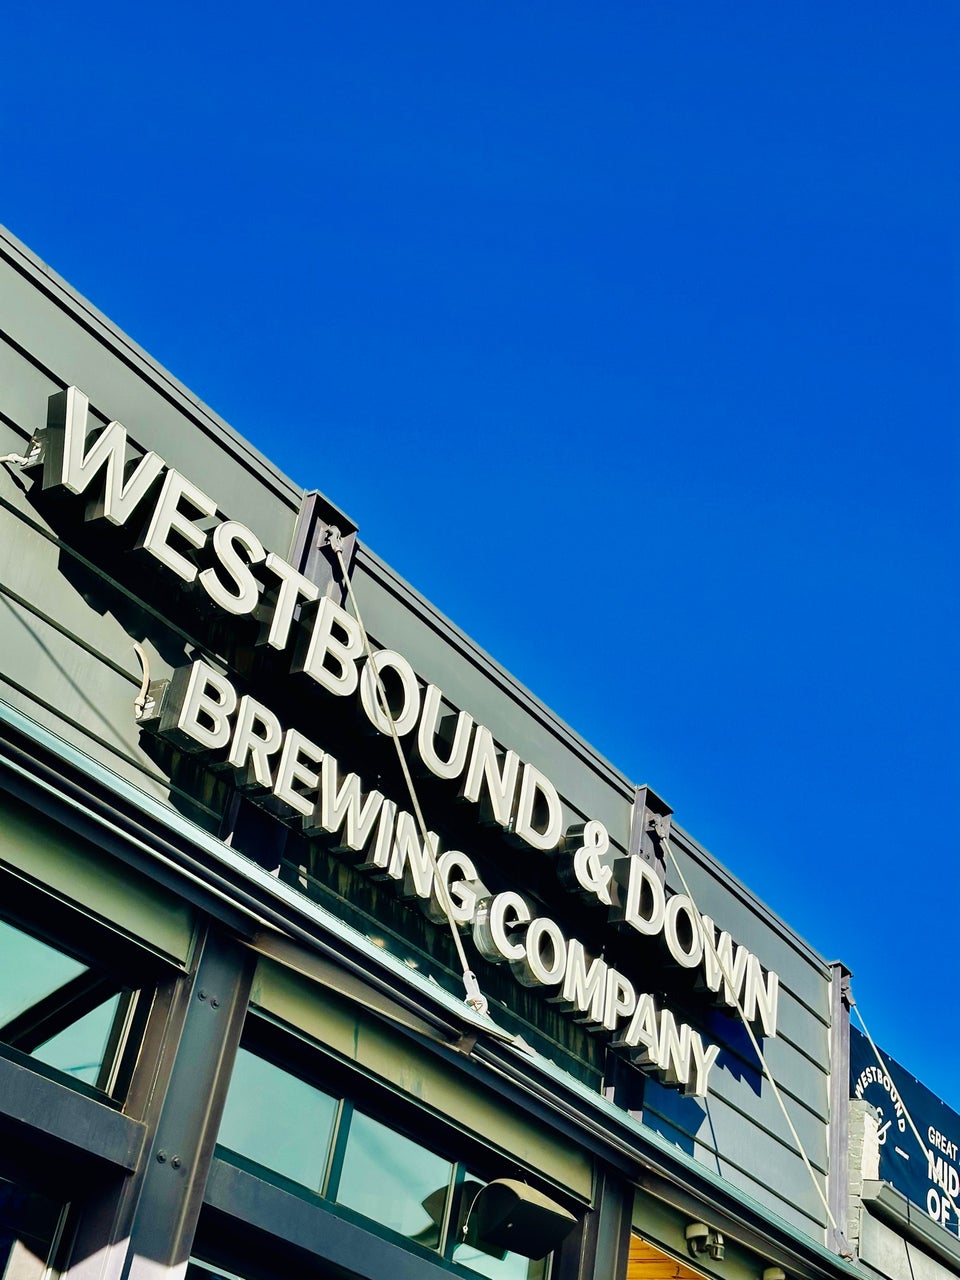 Westbound & Down Brewing Company